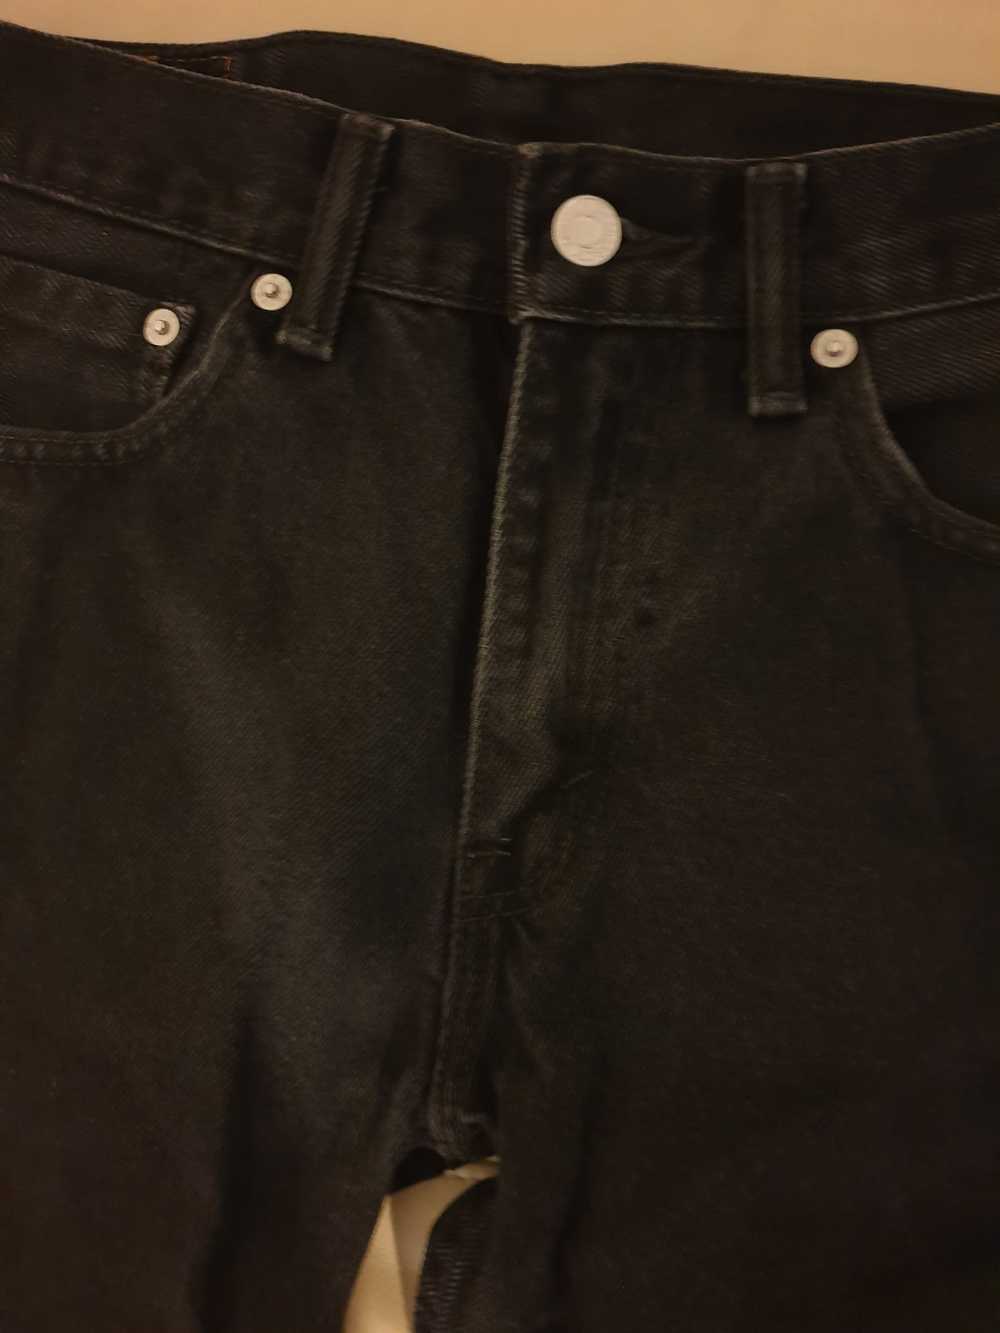 Levi's 505 - classic fit, faded black - image 2